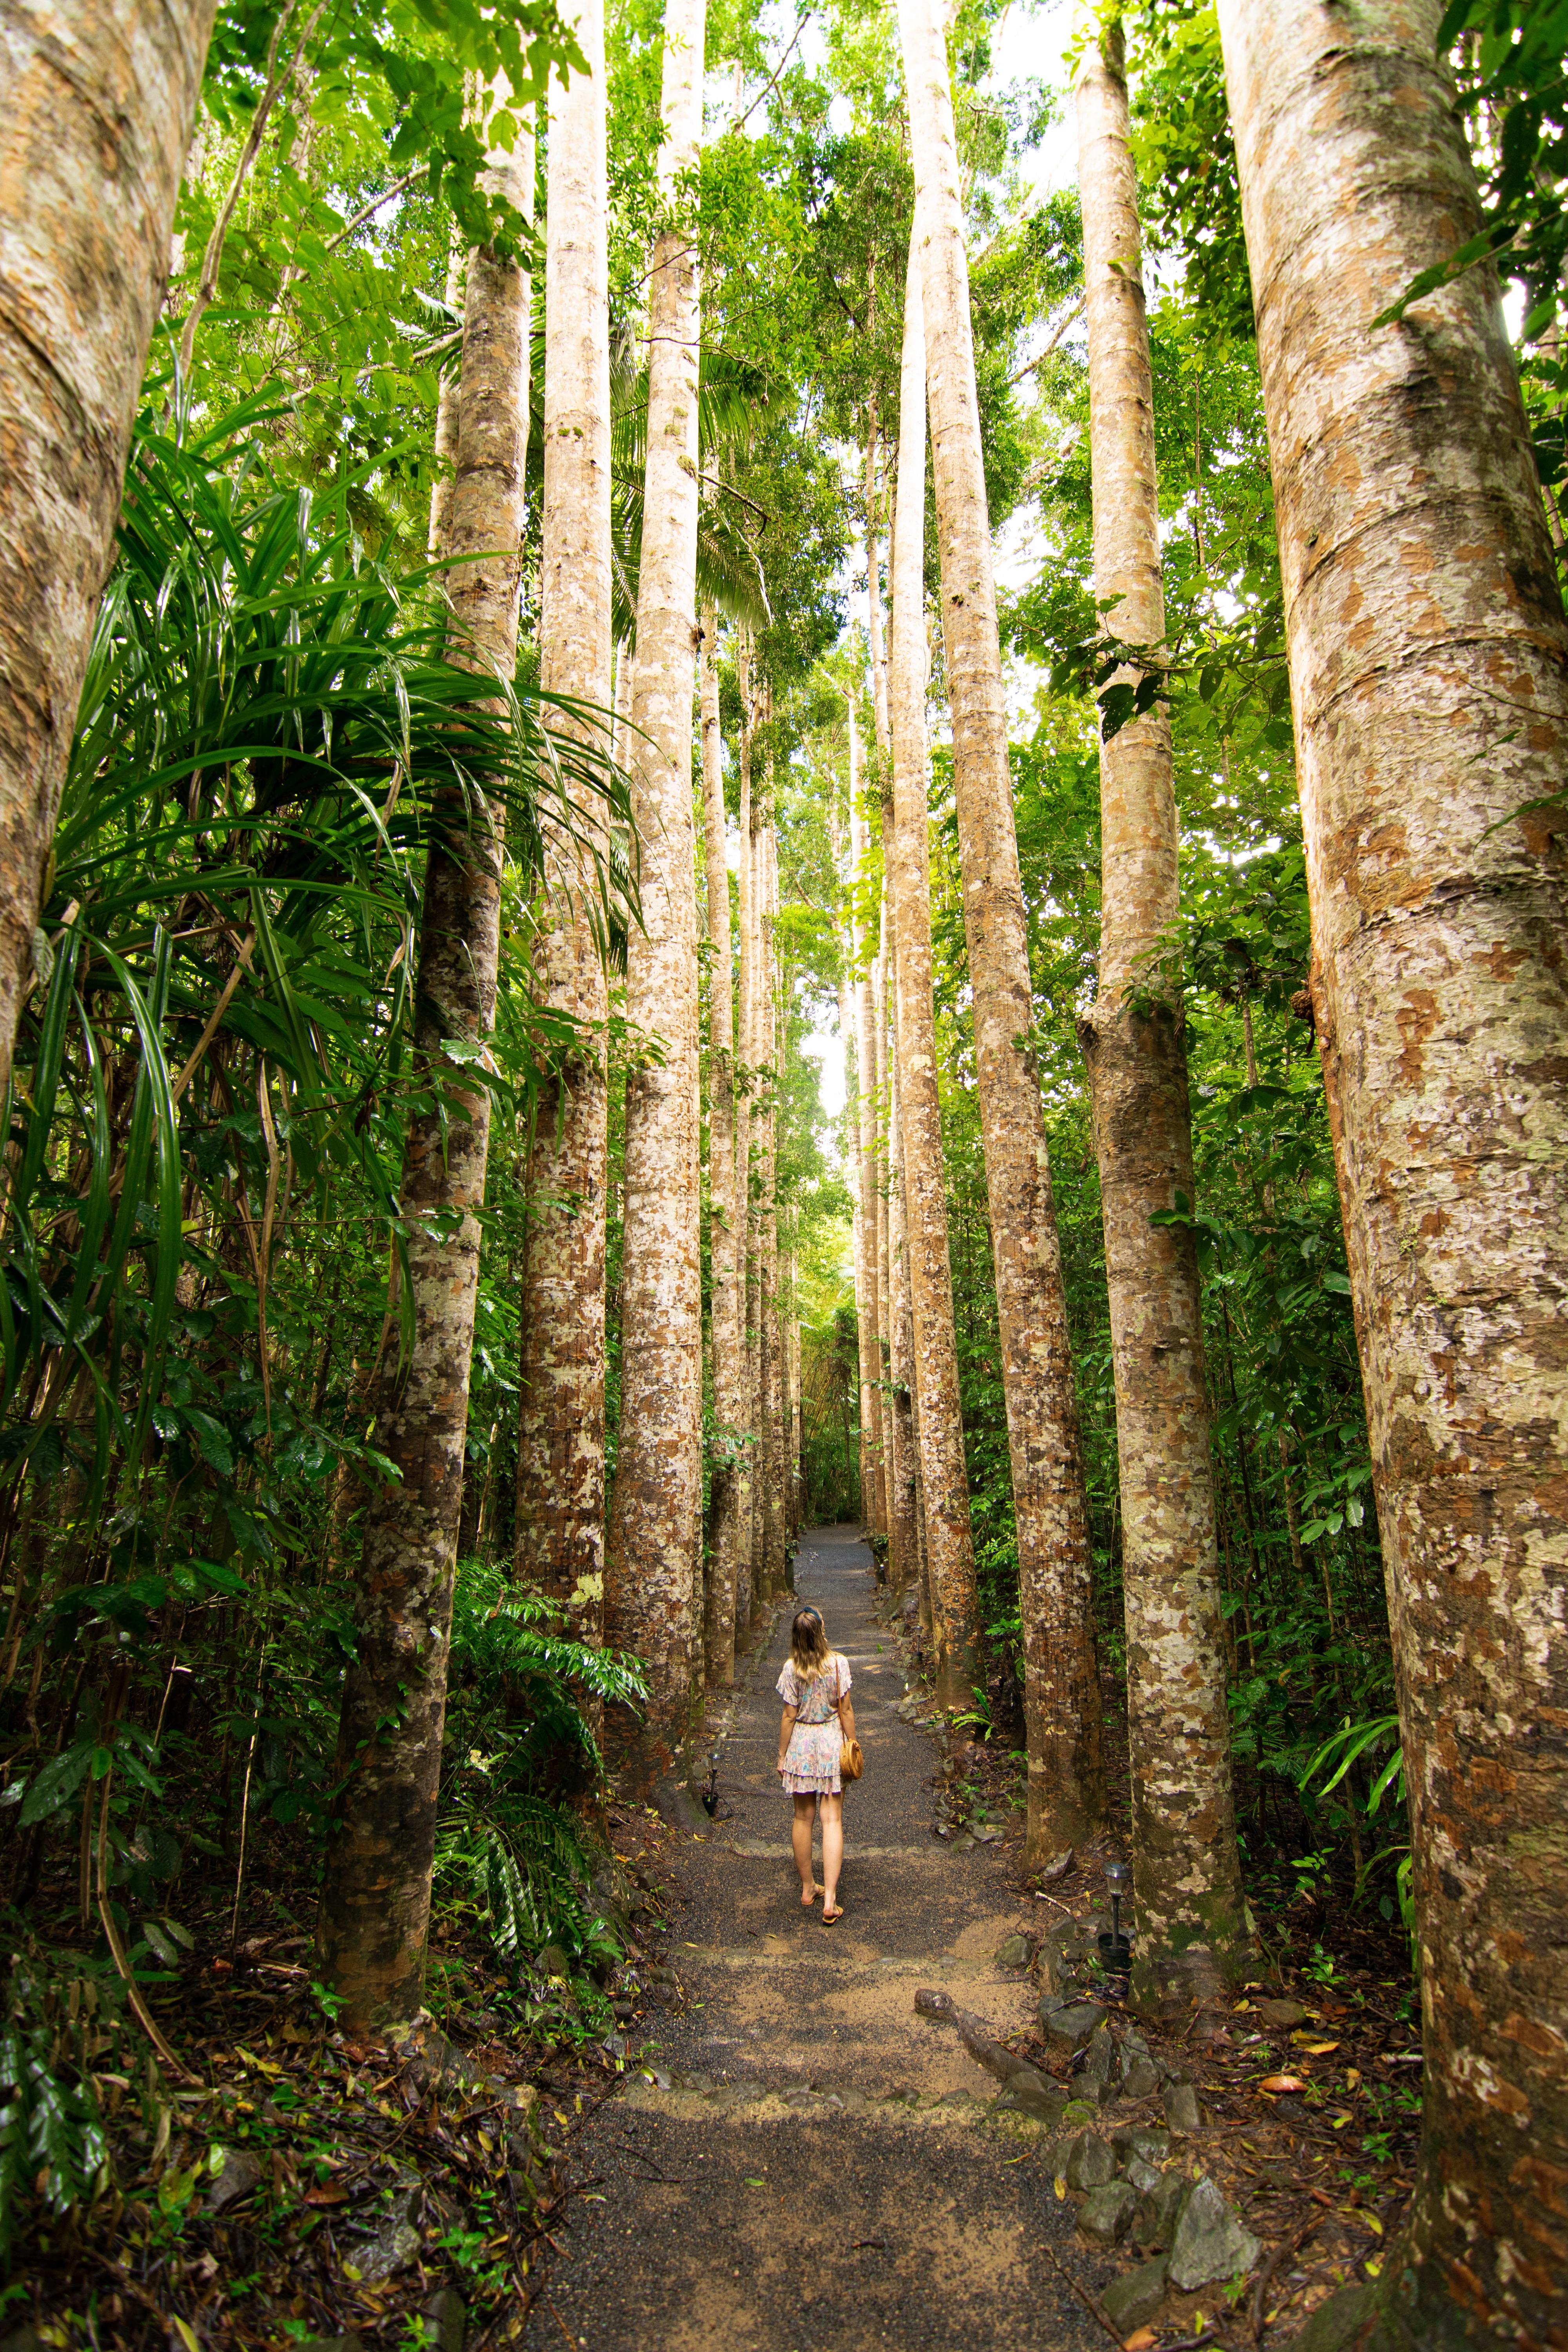 Girl standing in pathway lined by Kauri Pines at Paronella Park